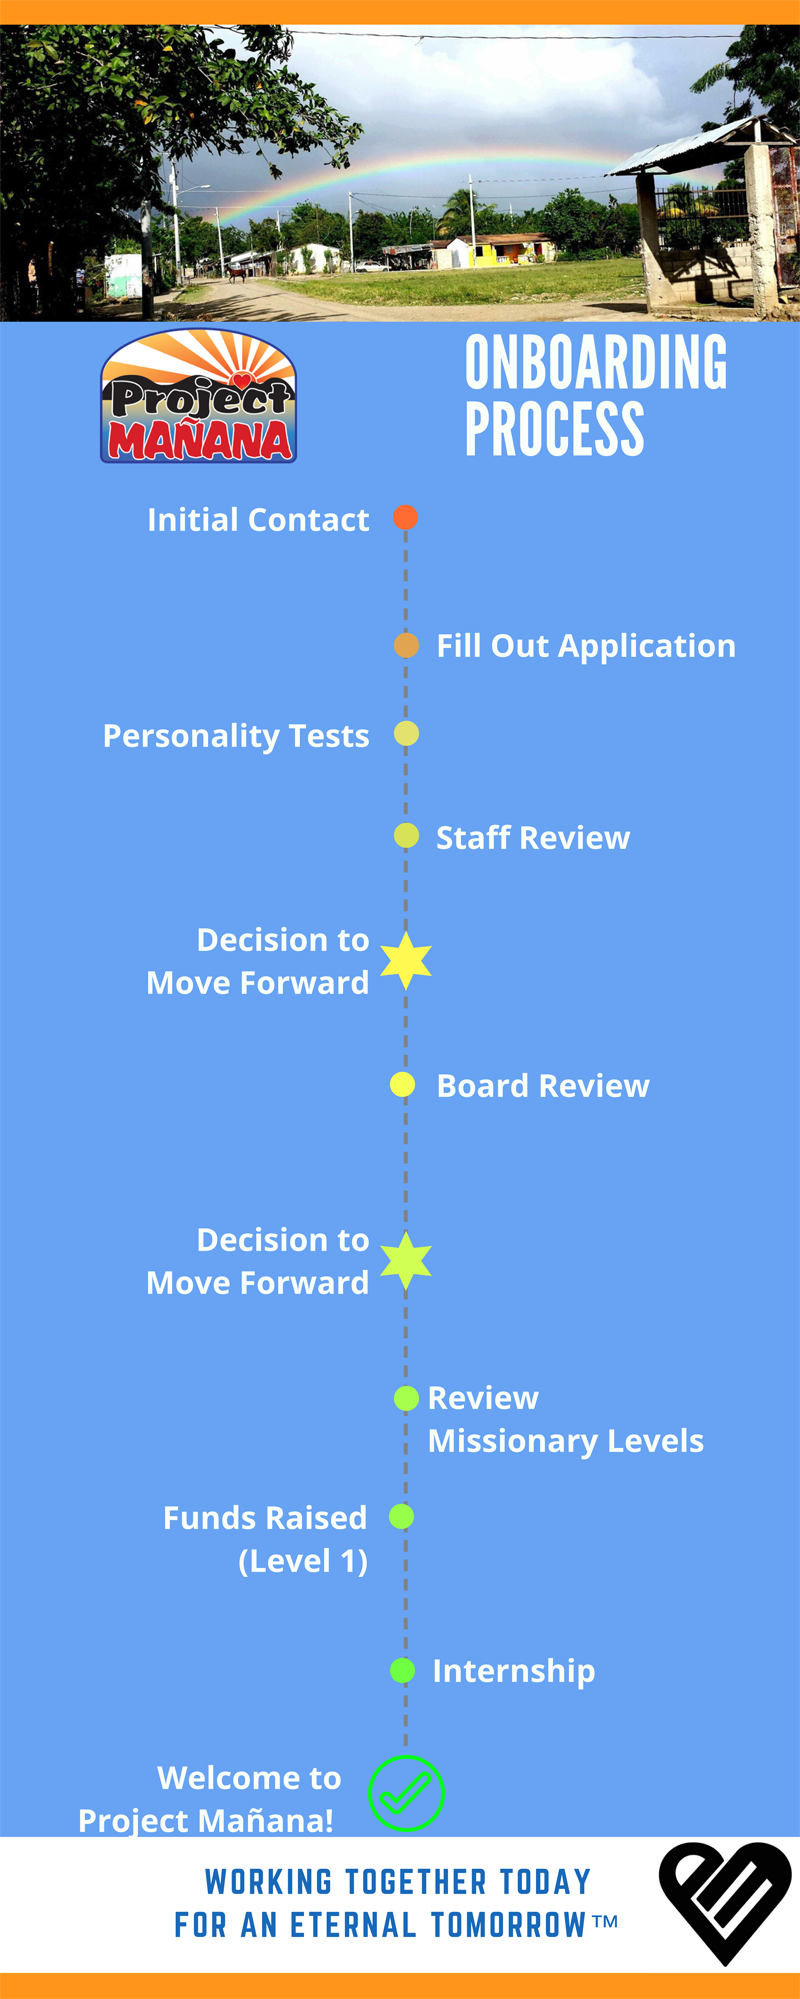 Project Manana Onboarding Process